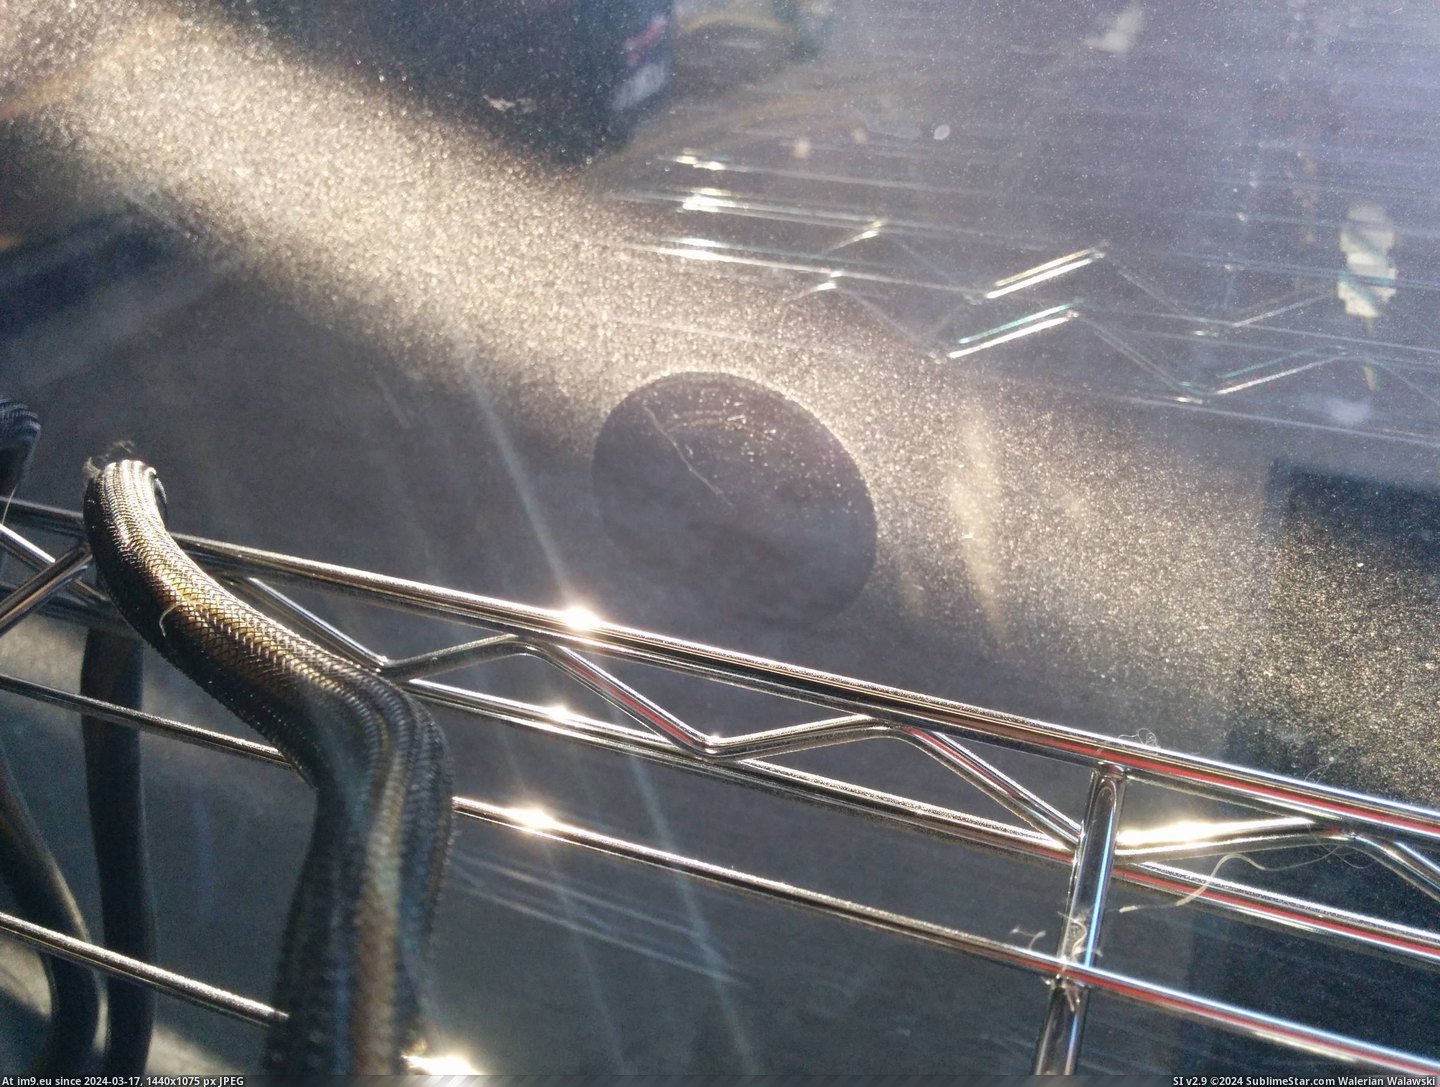 #Dog #Hair #Window #Blown #Dust #Vent #Sweeping #Piece #Stuck #Circle [Mildlyinteresting] This piece of dog hair stuck on my window has been getting blown by a vent and sweeping the dust in a circle Pic. (Image of album My r/MILDLYINTERESTING favs))